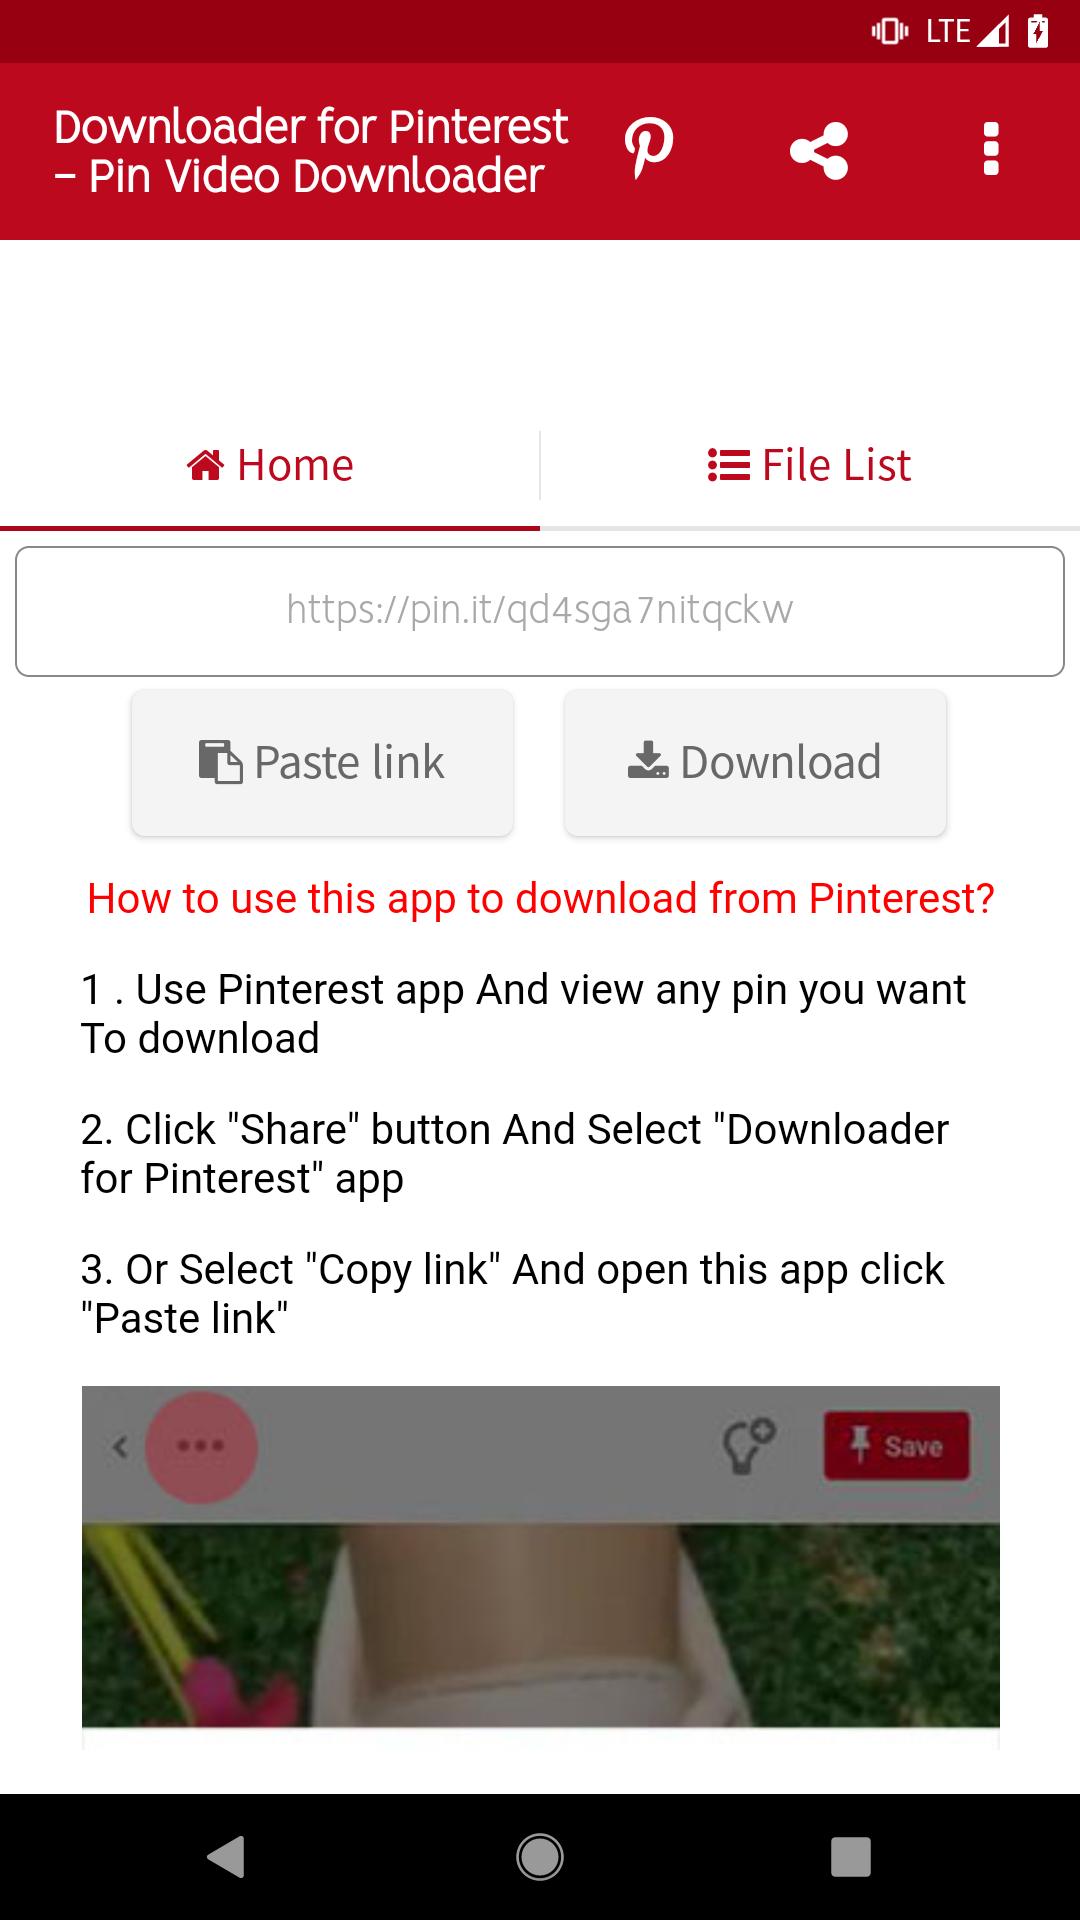 Android 用の Downloader For Pinterest Gif Saver For Pinterest Apk をダウンロード